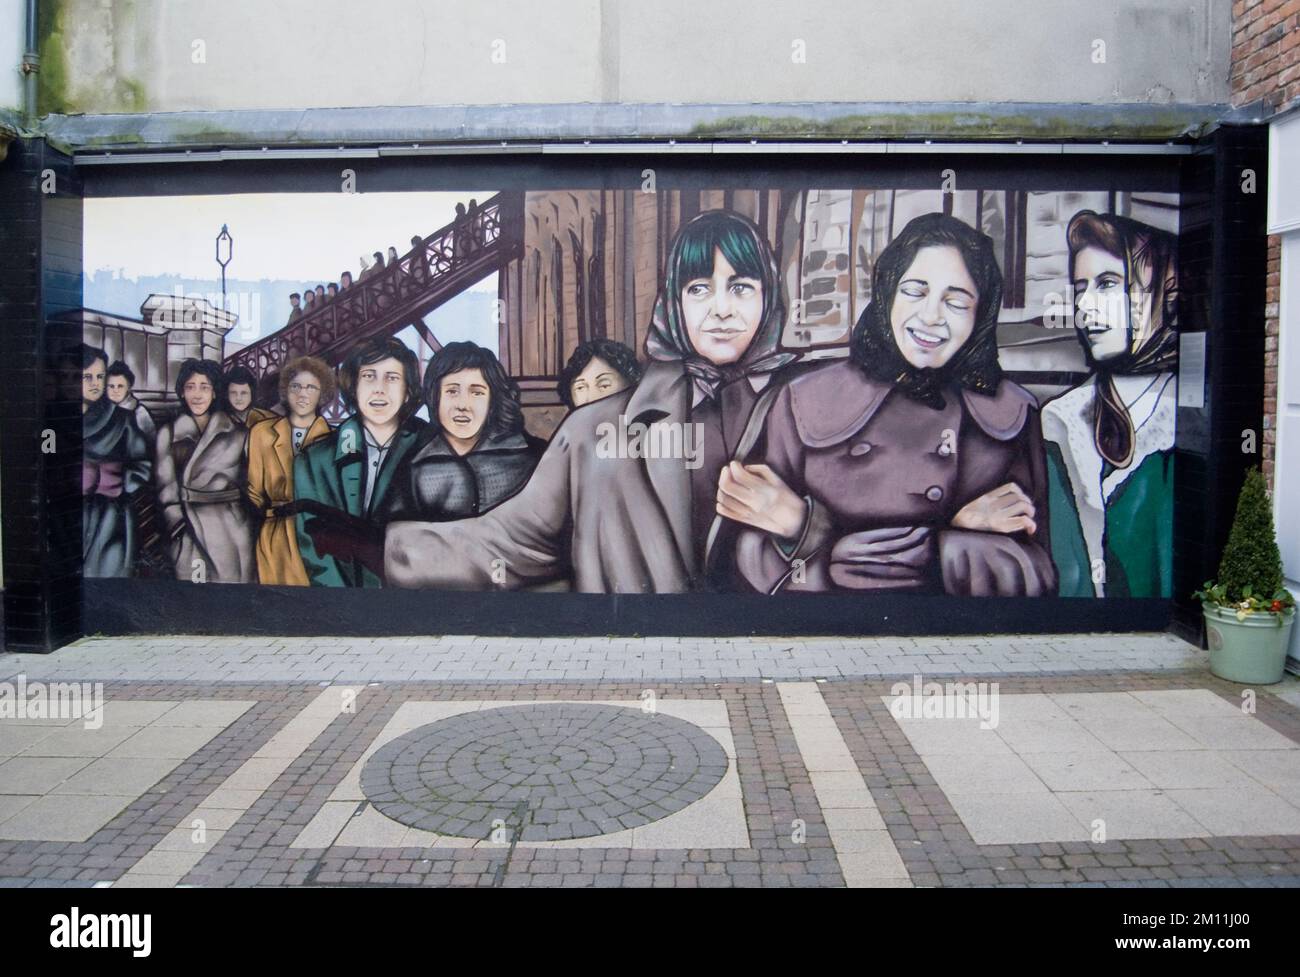 Ireland, North, Derry City, Murals depicting the original Derry Girls who worked in shirt making factories in The Craft Village within the old city walls. Stock Photo